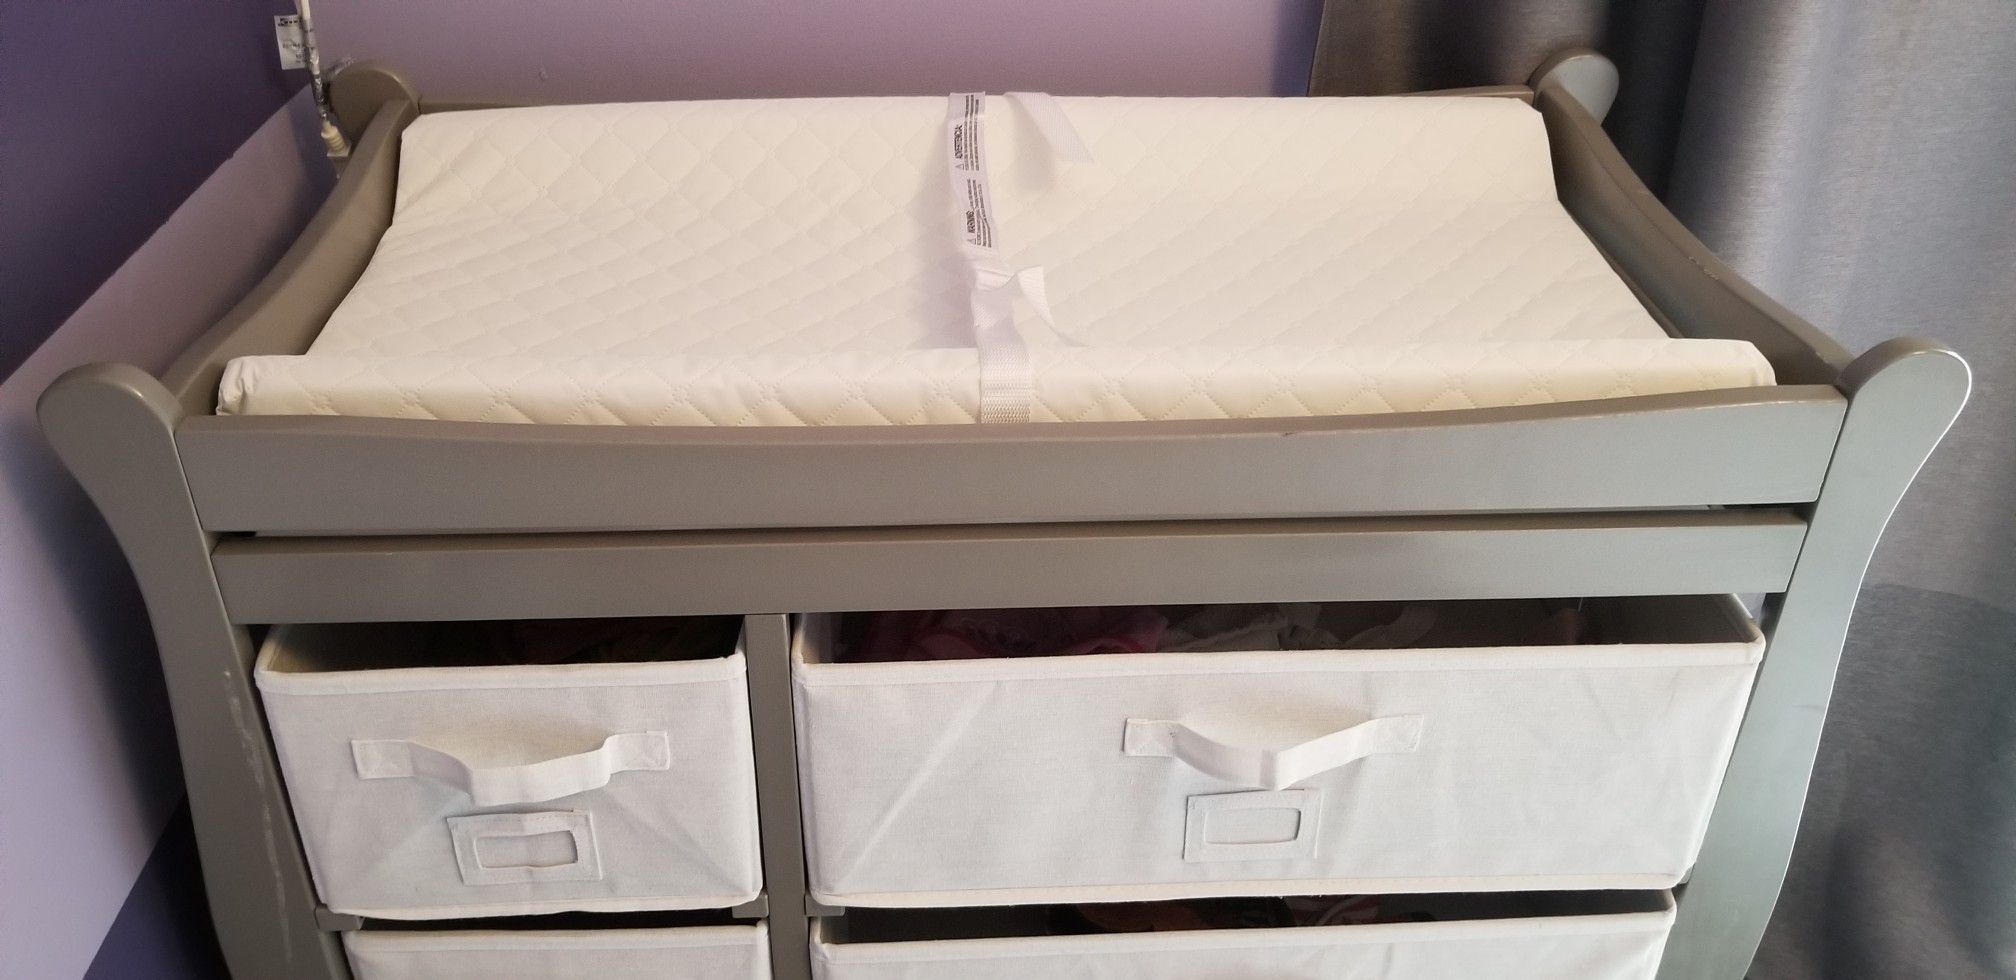 Baby changing table with canvas drawer storage.